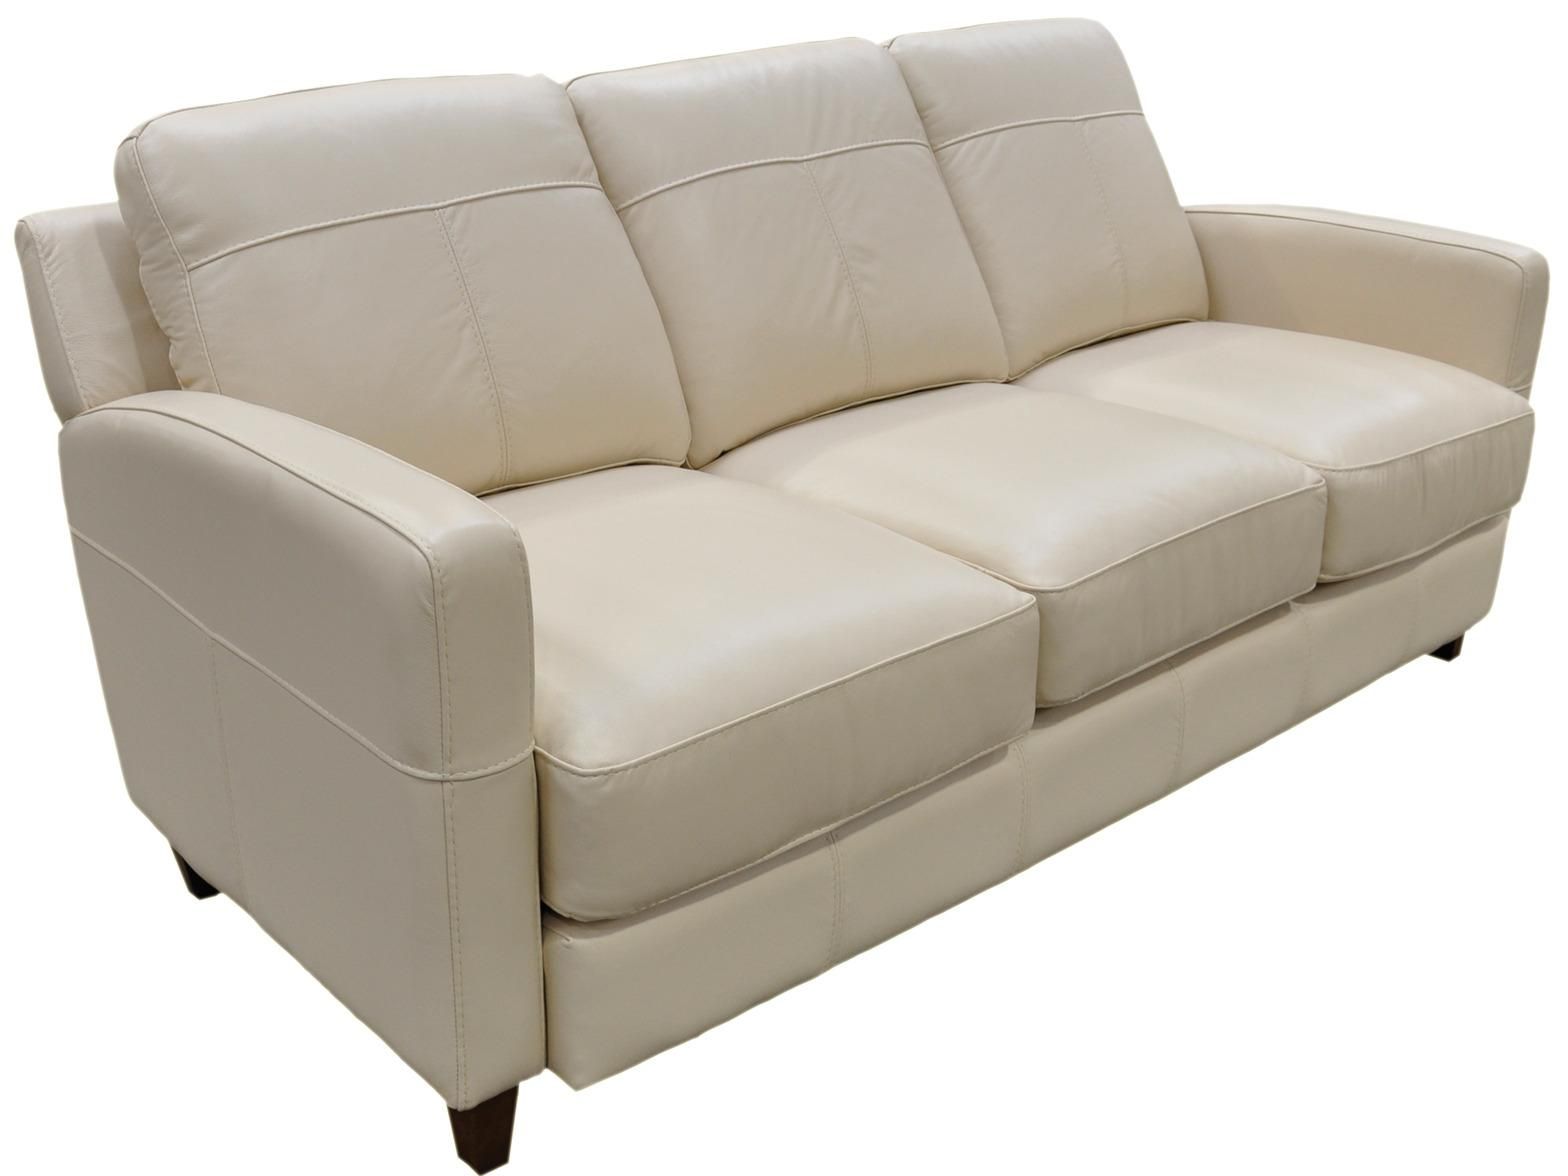 New Ideas Sectional Sofas Dallas Tx With Leather Sofa Byron Throughout Skyline Sofas (View 8 of 20)